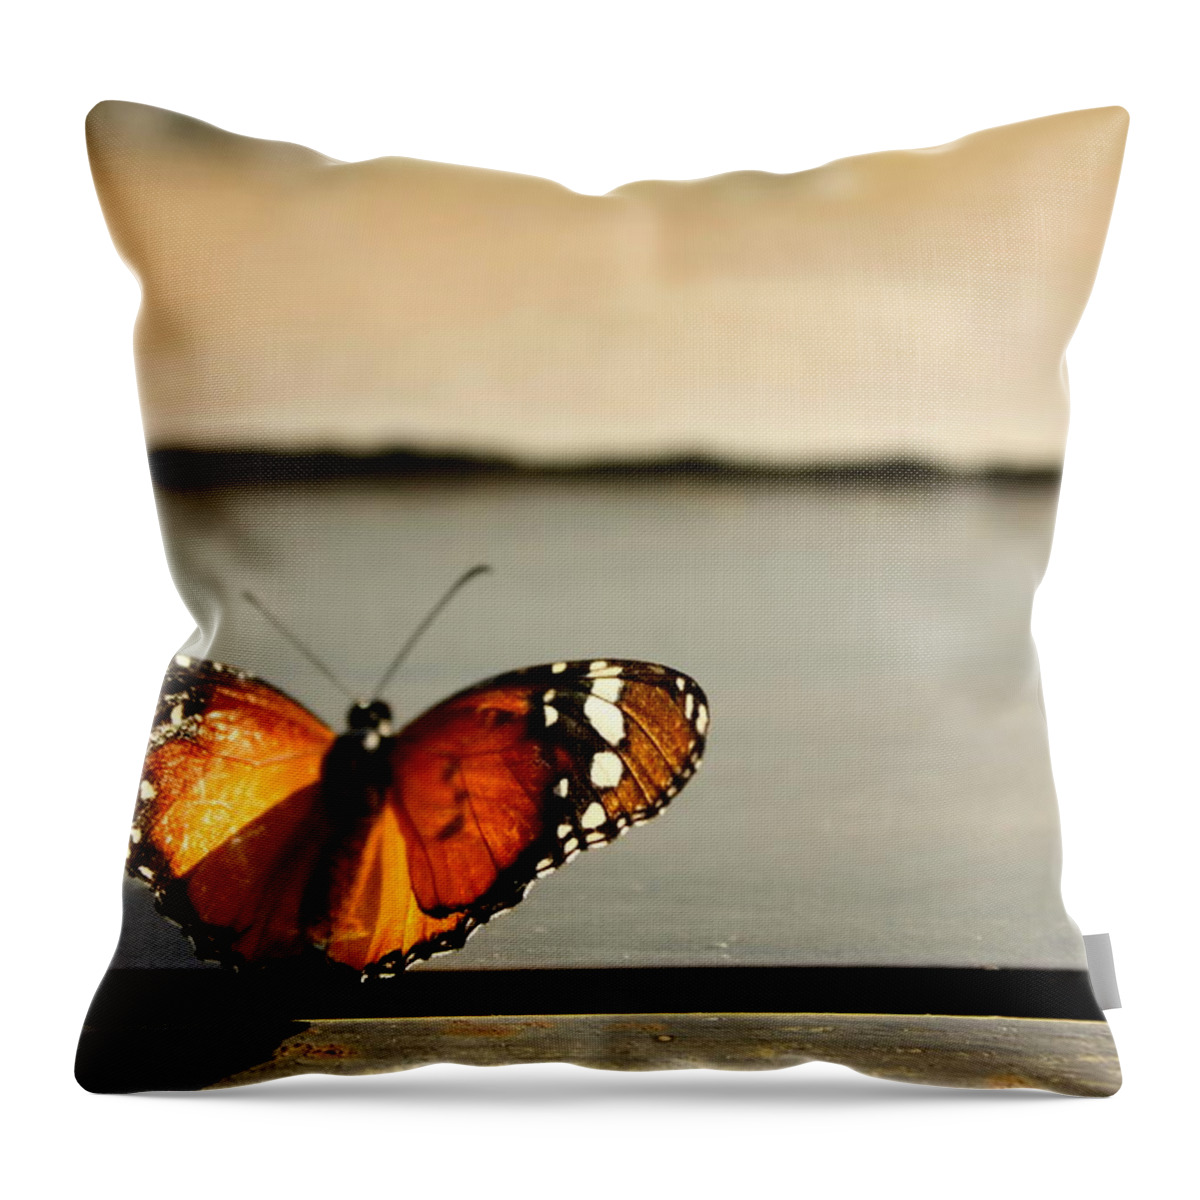 Natural Pattern Throw Pillow featuring the photograph Butterfly Perched On Sunlit Window Sill by Karen Hernandez